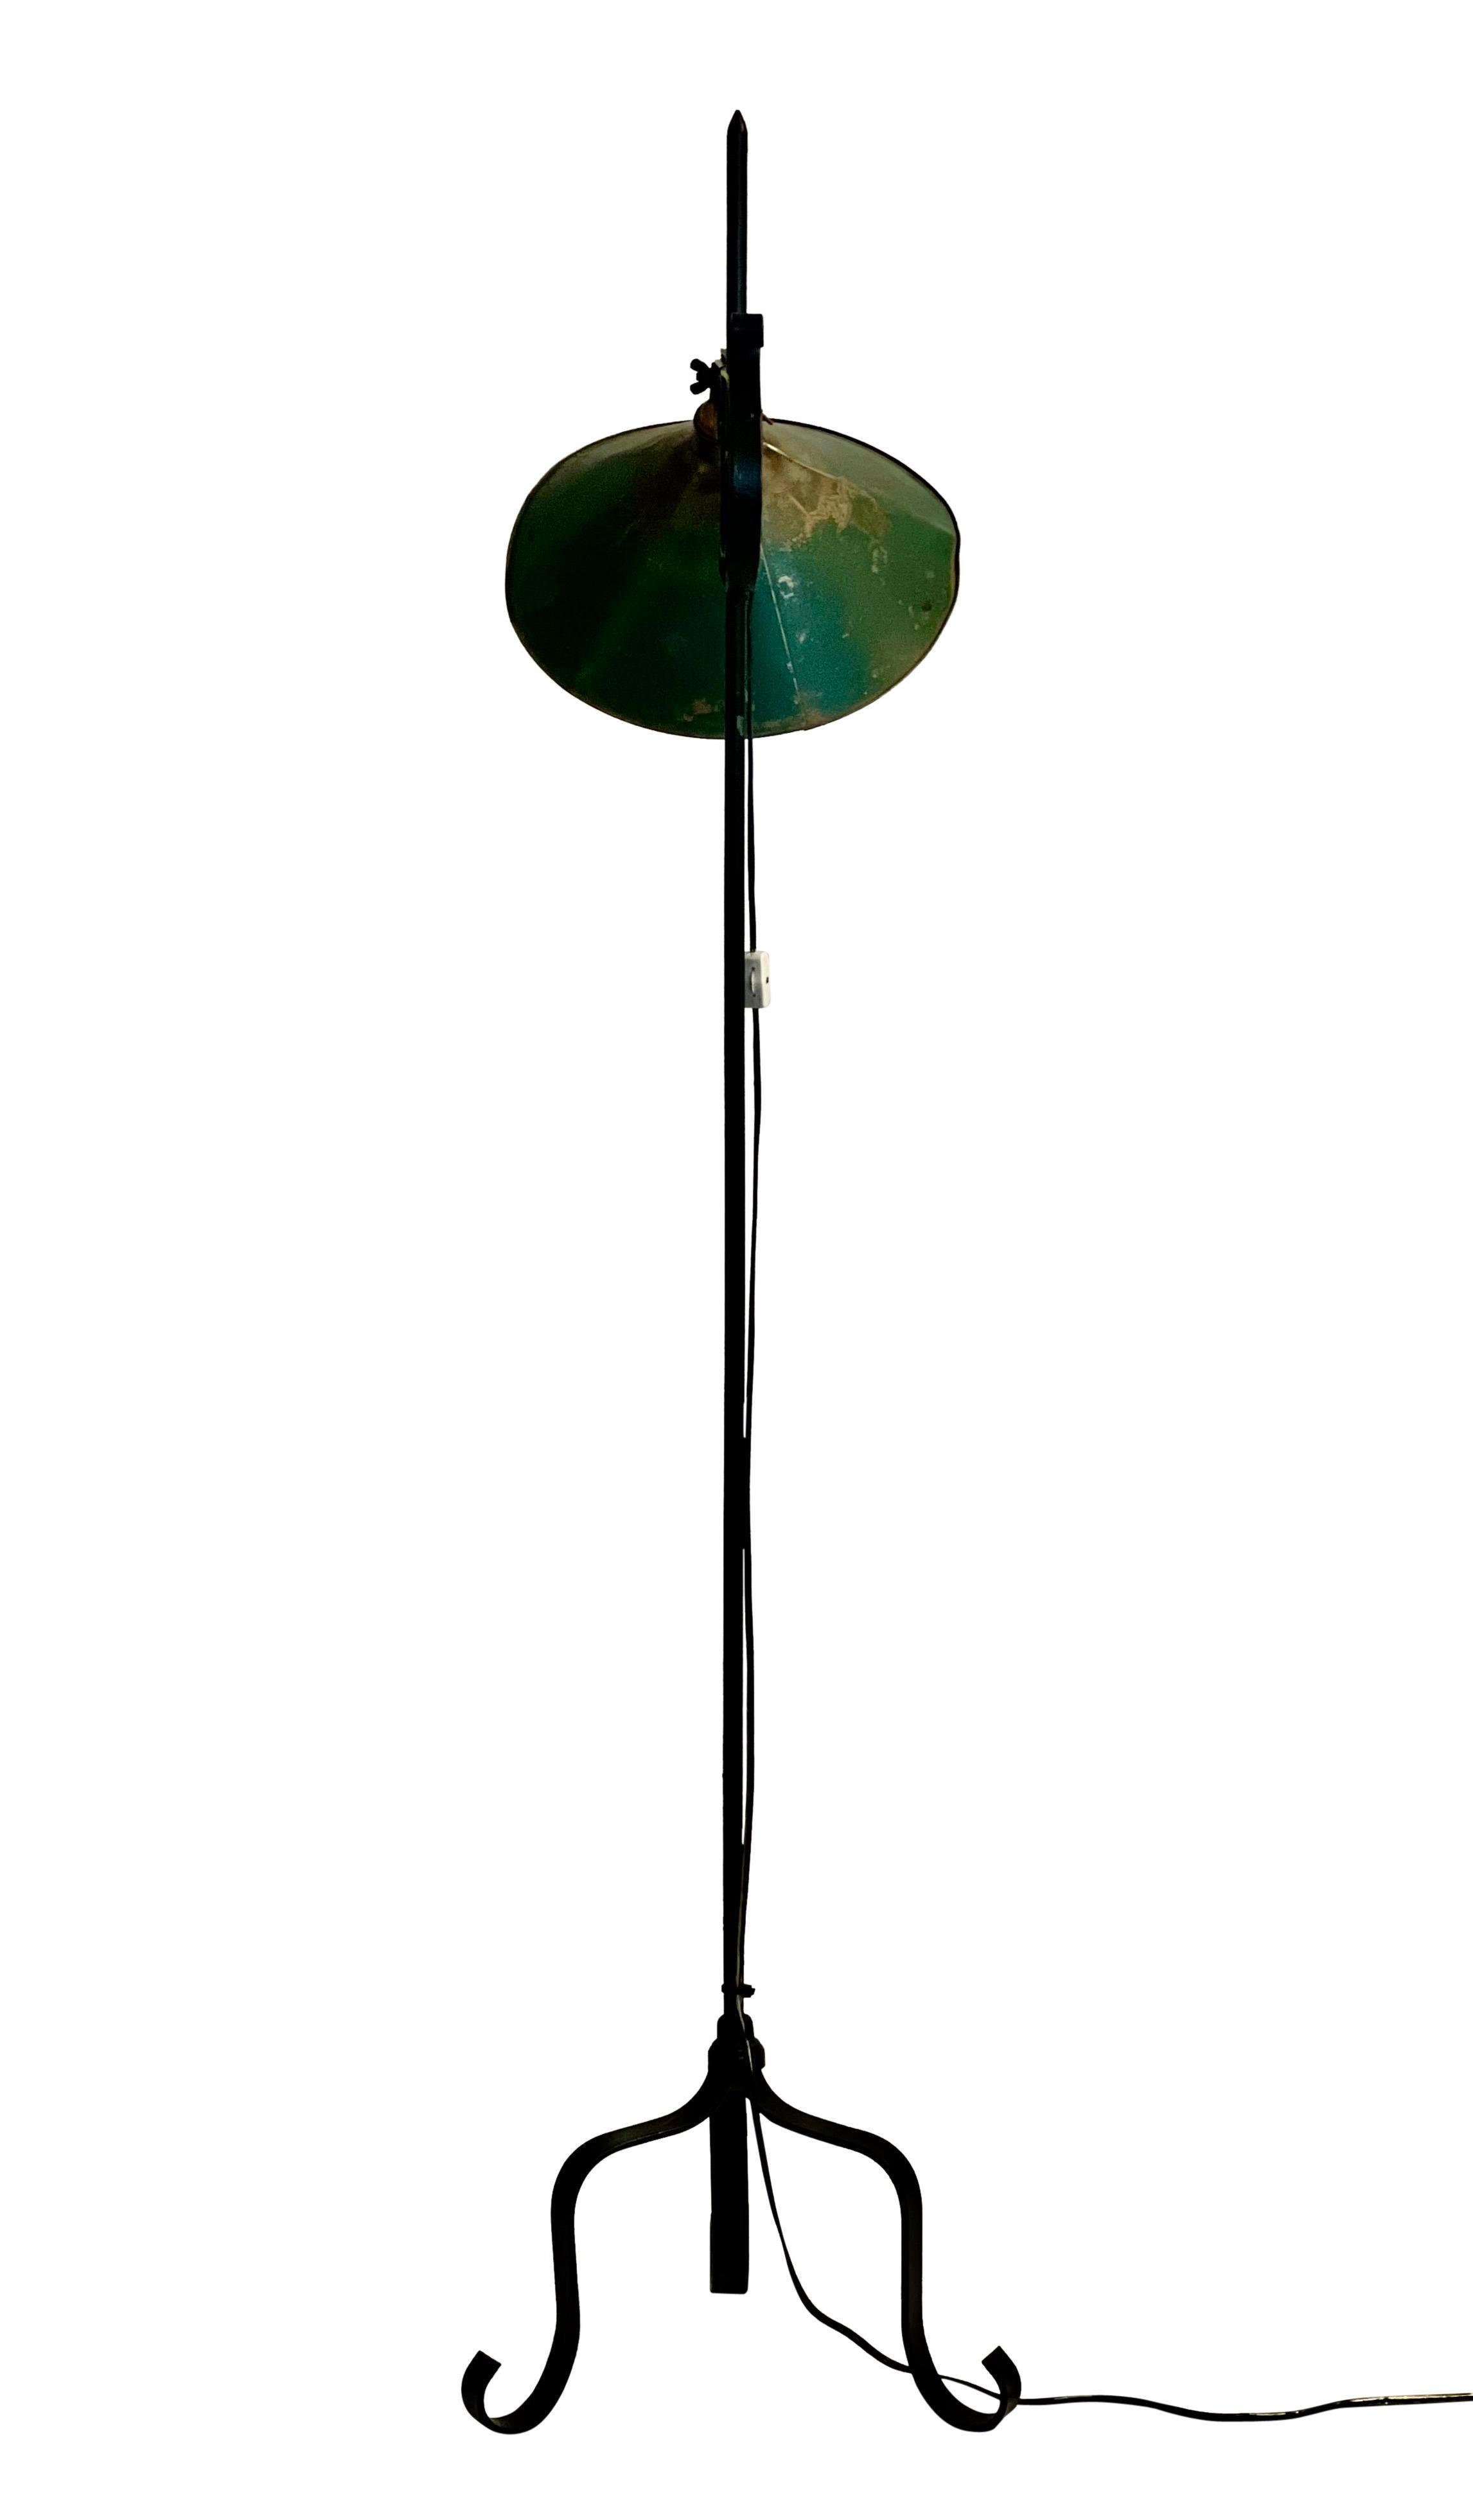 North American Antique Handcrafted Wrought Iron Floor Lamp with Metal Shade, circa 1910 For Sale